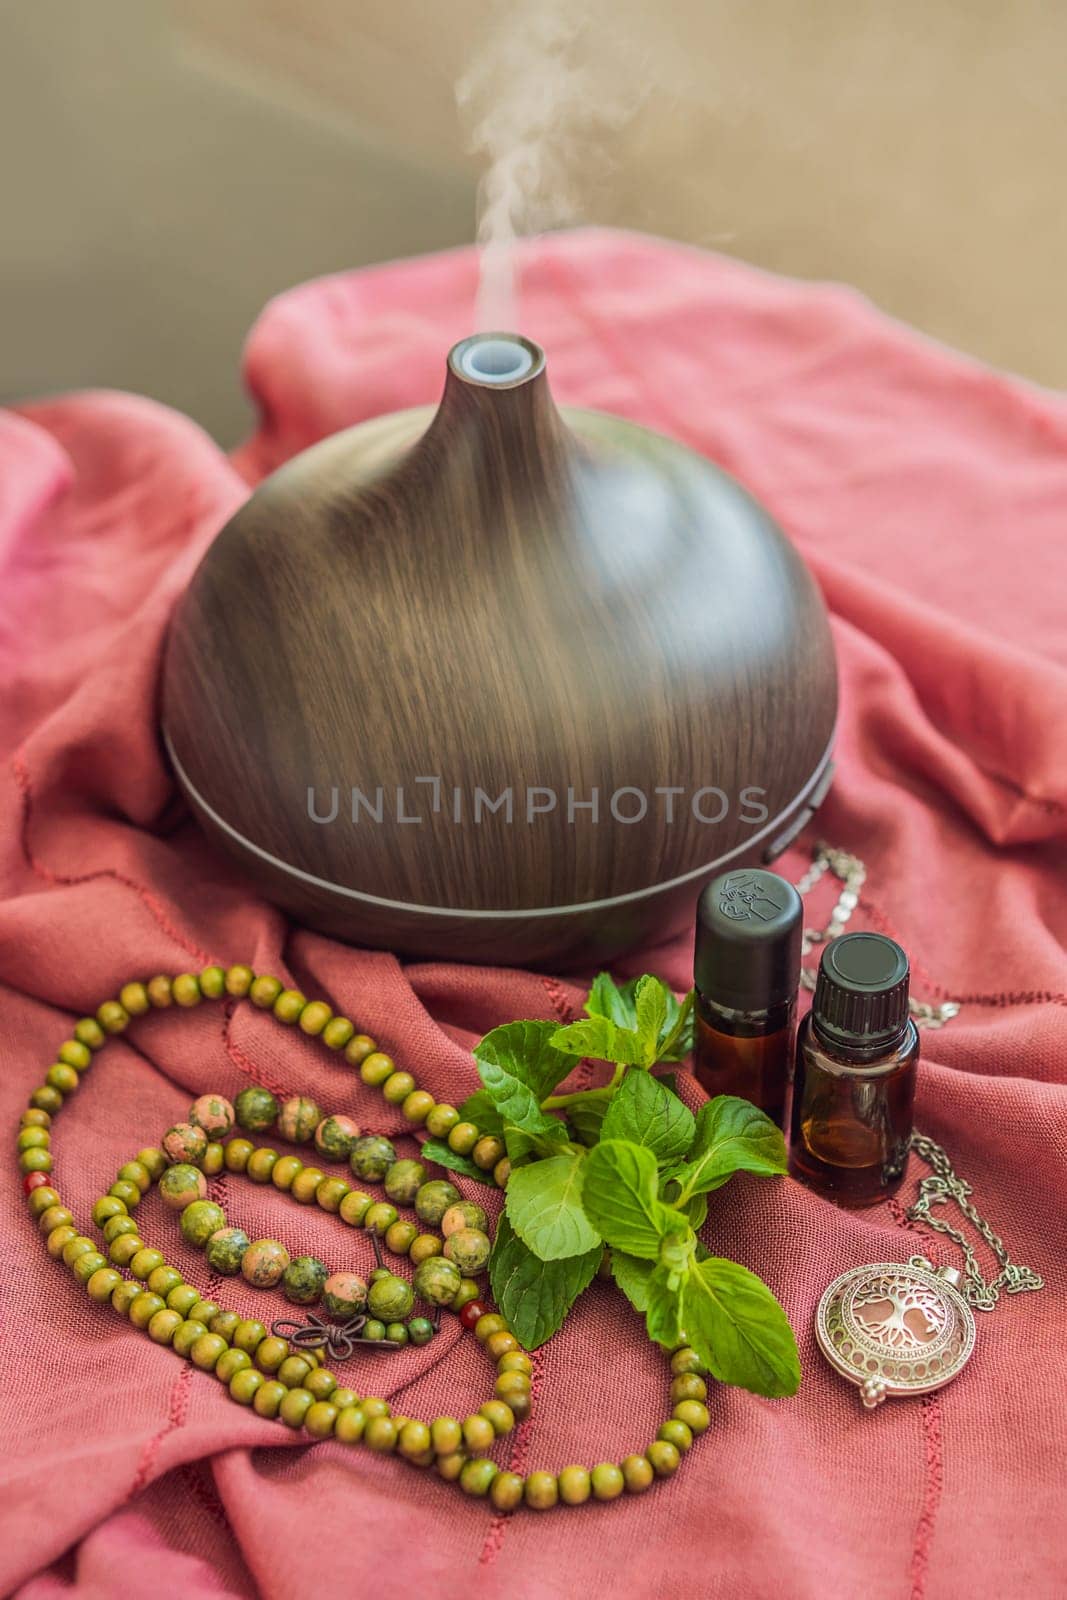 A captivating photo capturing the essence of relaxation and ambiance with an aroma oil and aroma diffuser, creating a soothing and serene atmosphere by galitskaya